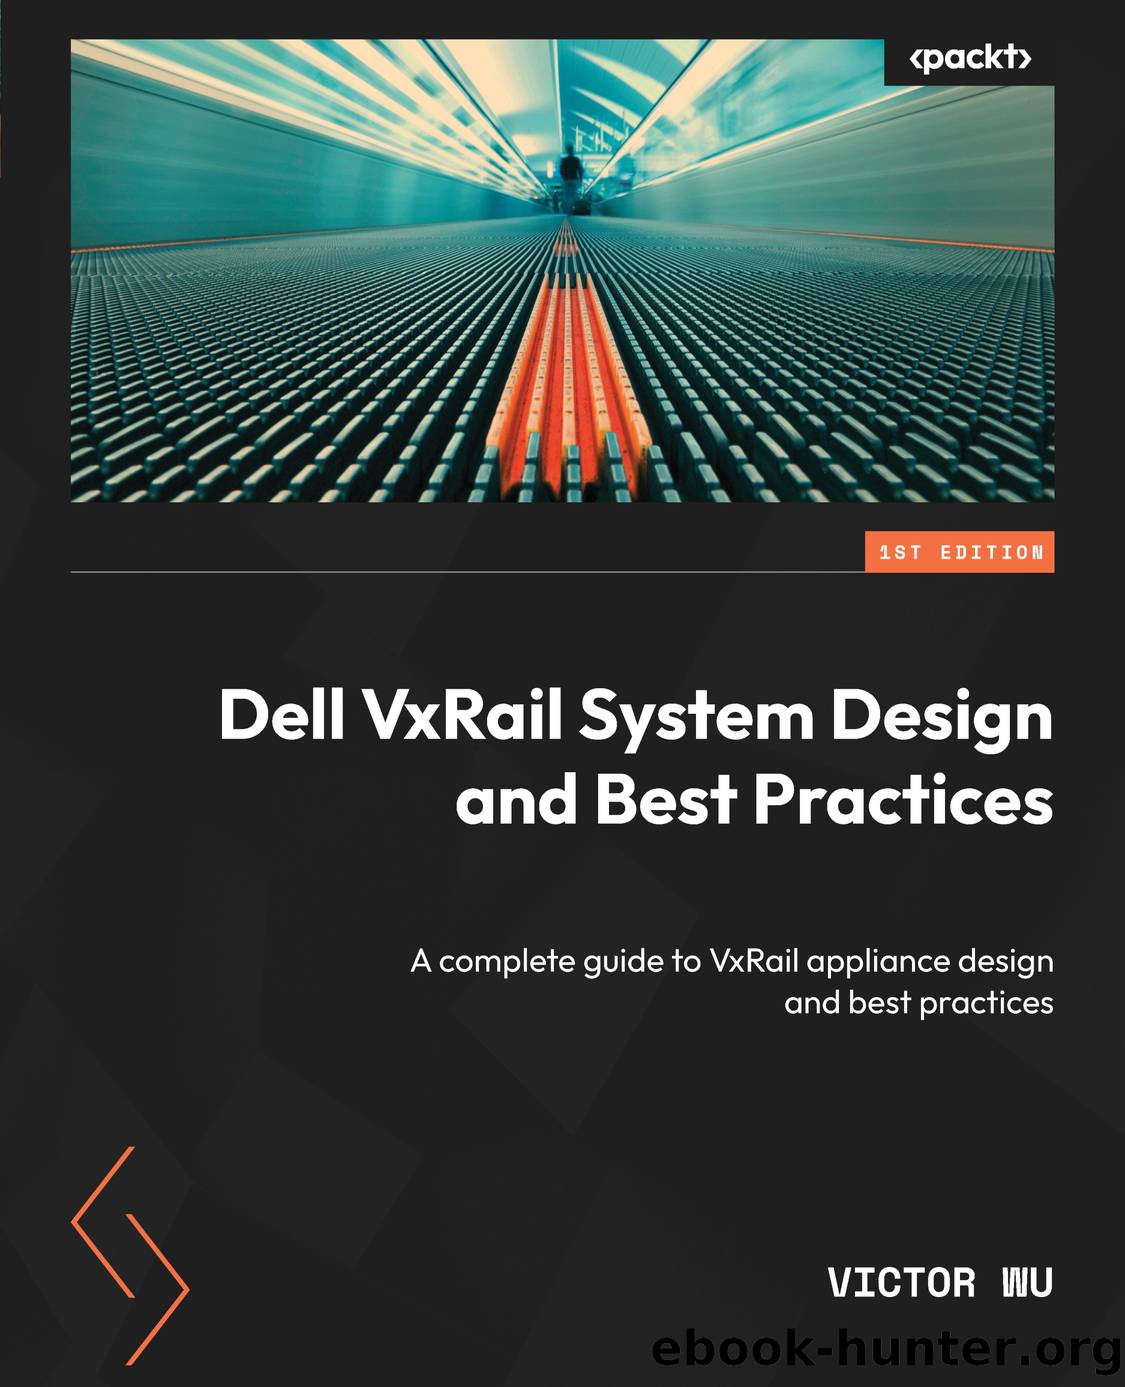 Dell VxRail System Design and Best Practices by Victor Wu